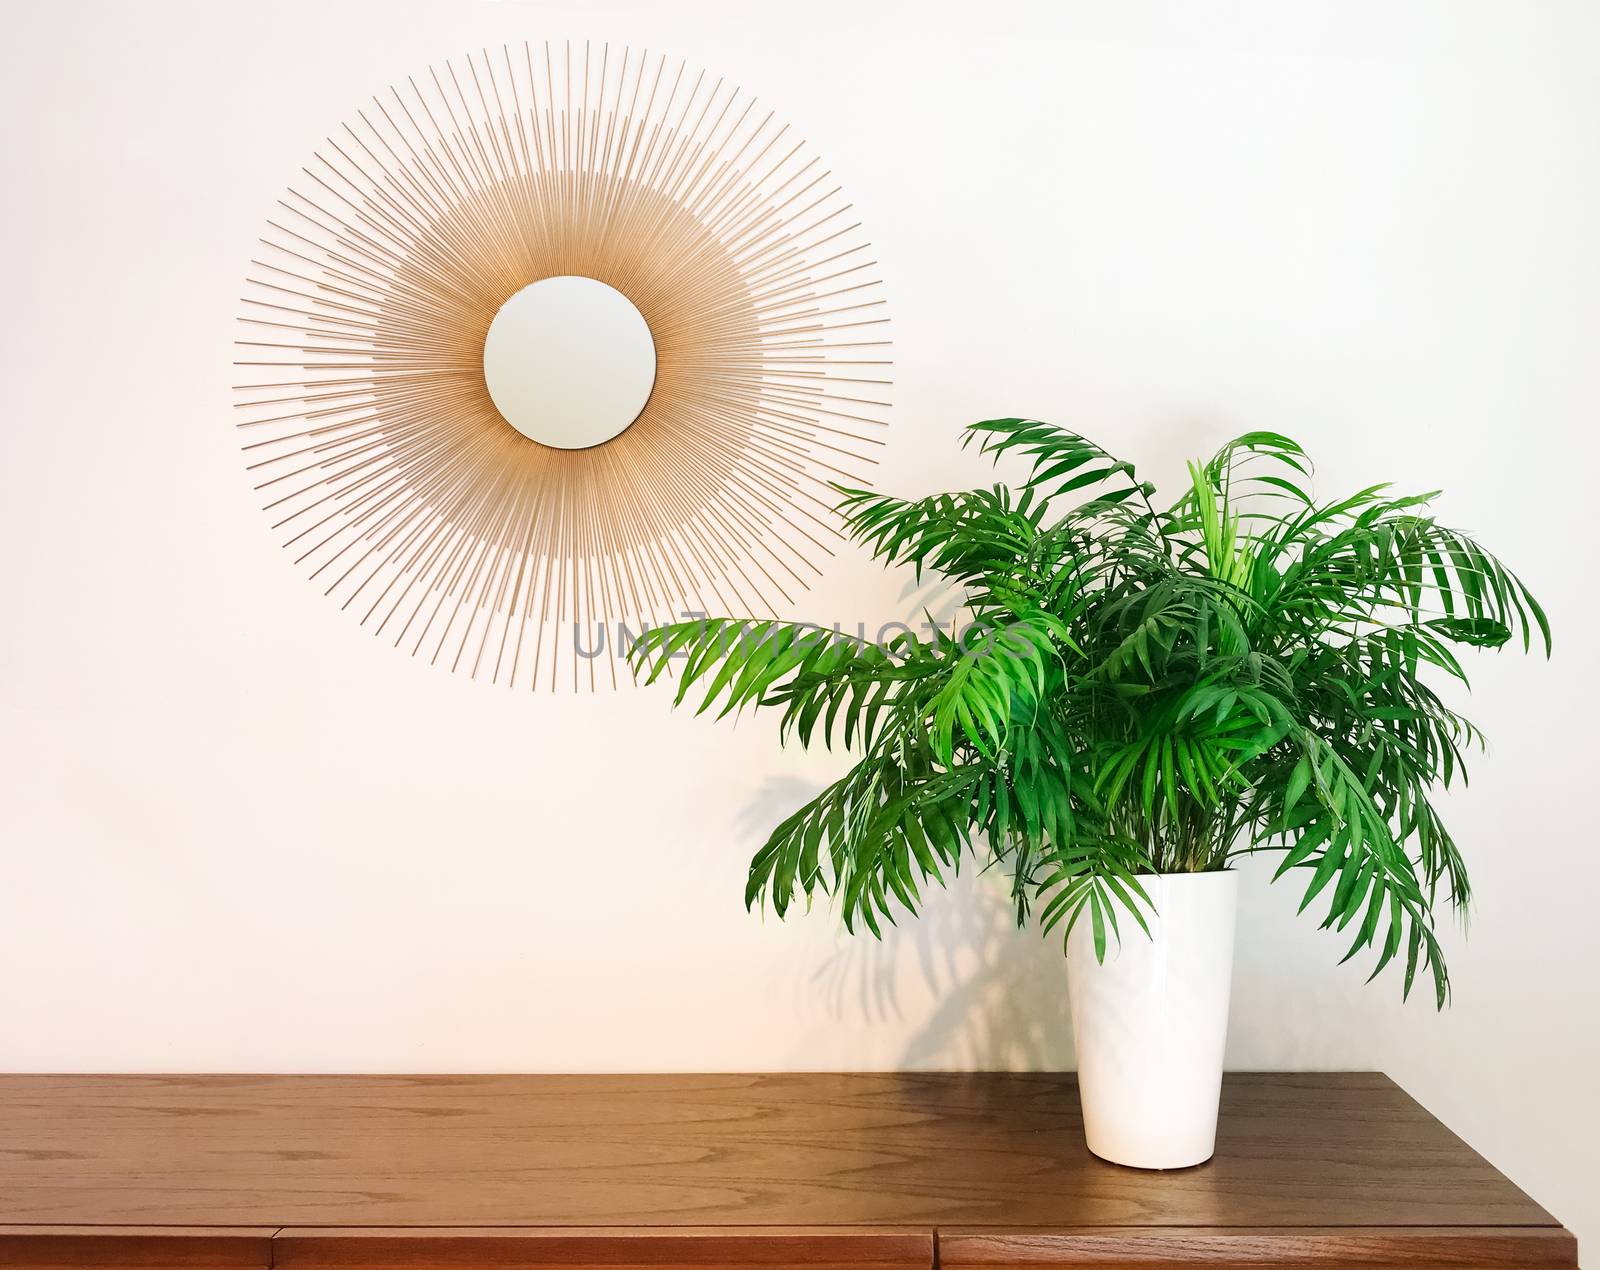 Decorative round mirror and parlor palm plant on a dresser by anikasalsera